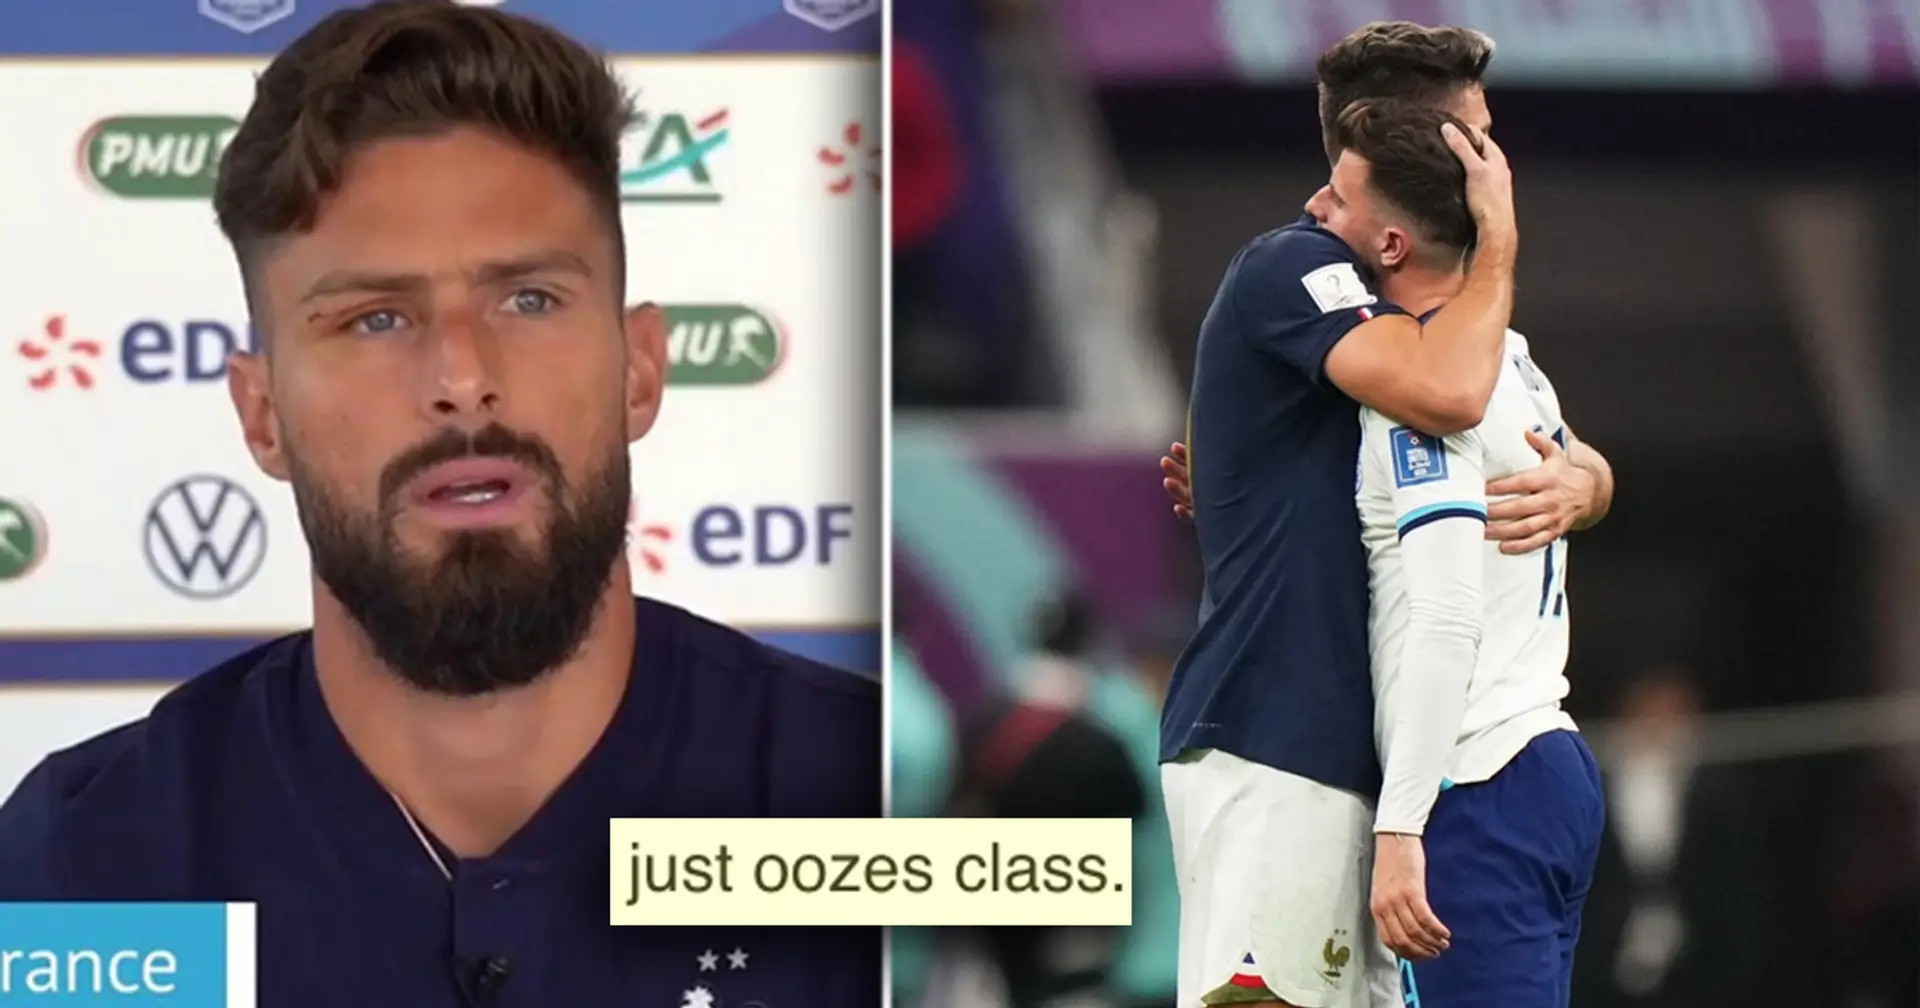 'One can't buy that loyalty and class': Giroud spotted consoling Mount after England loss